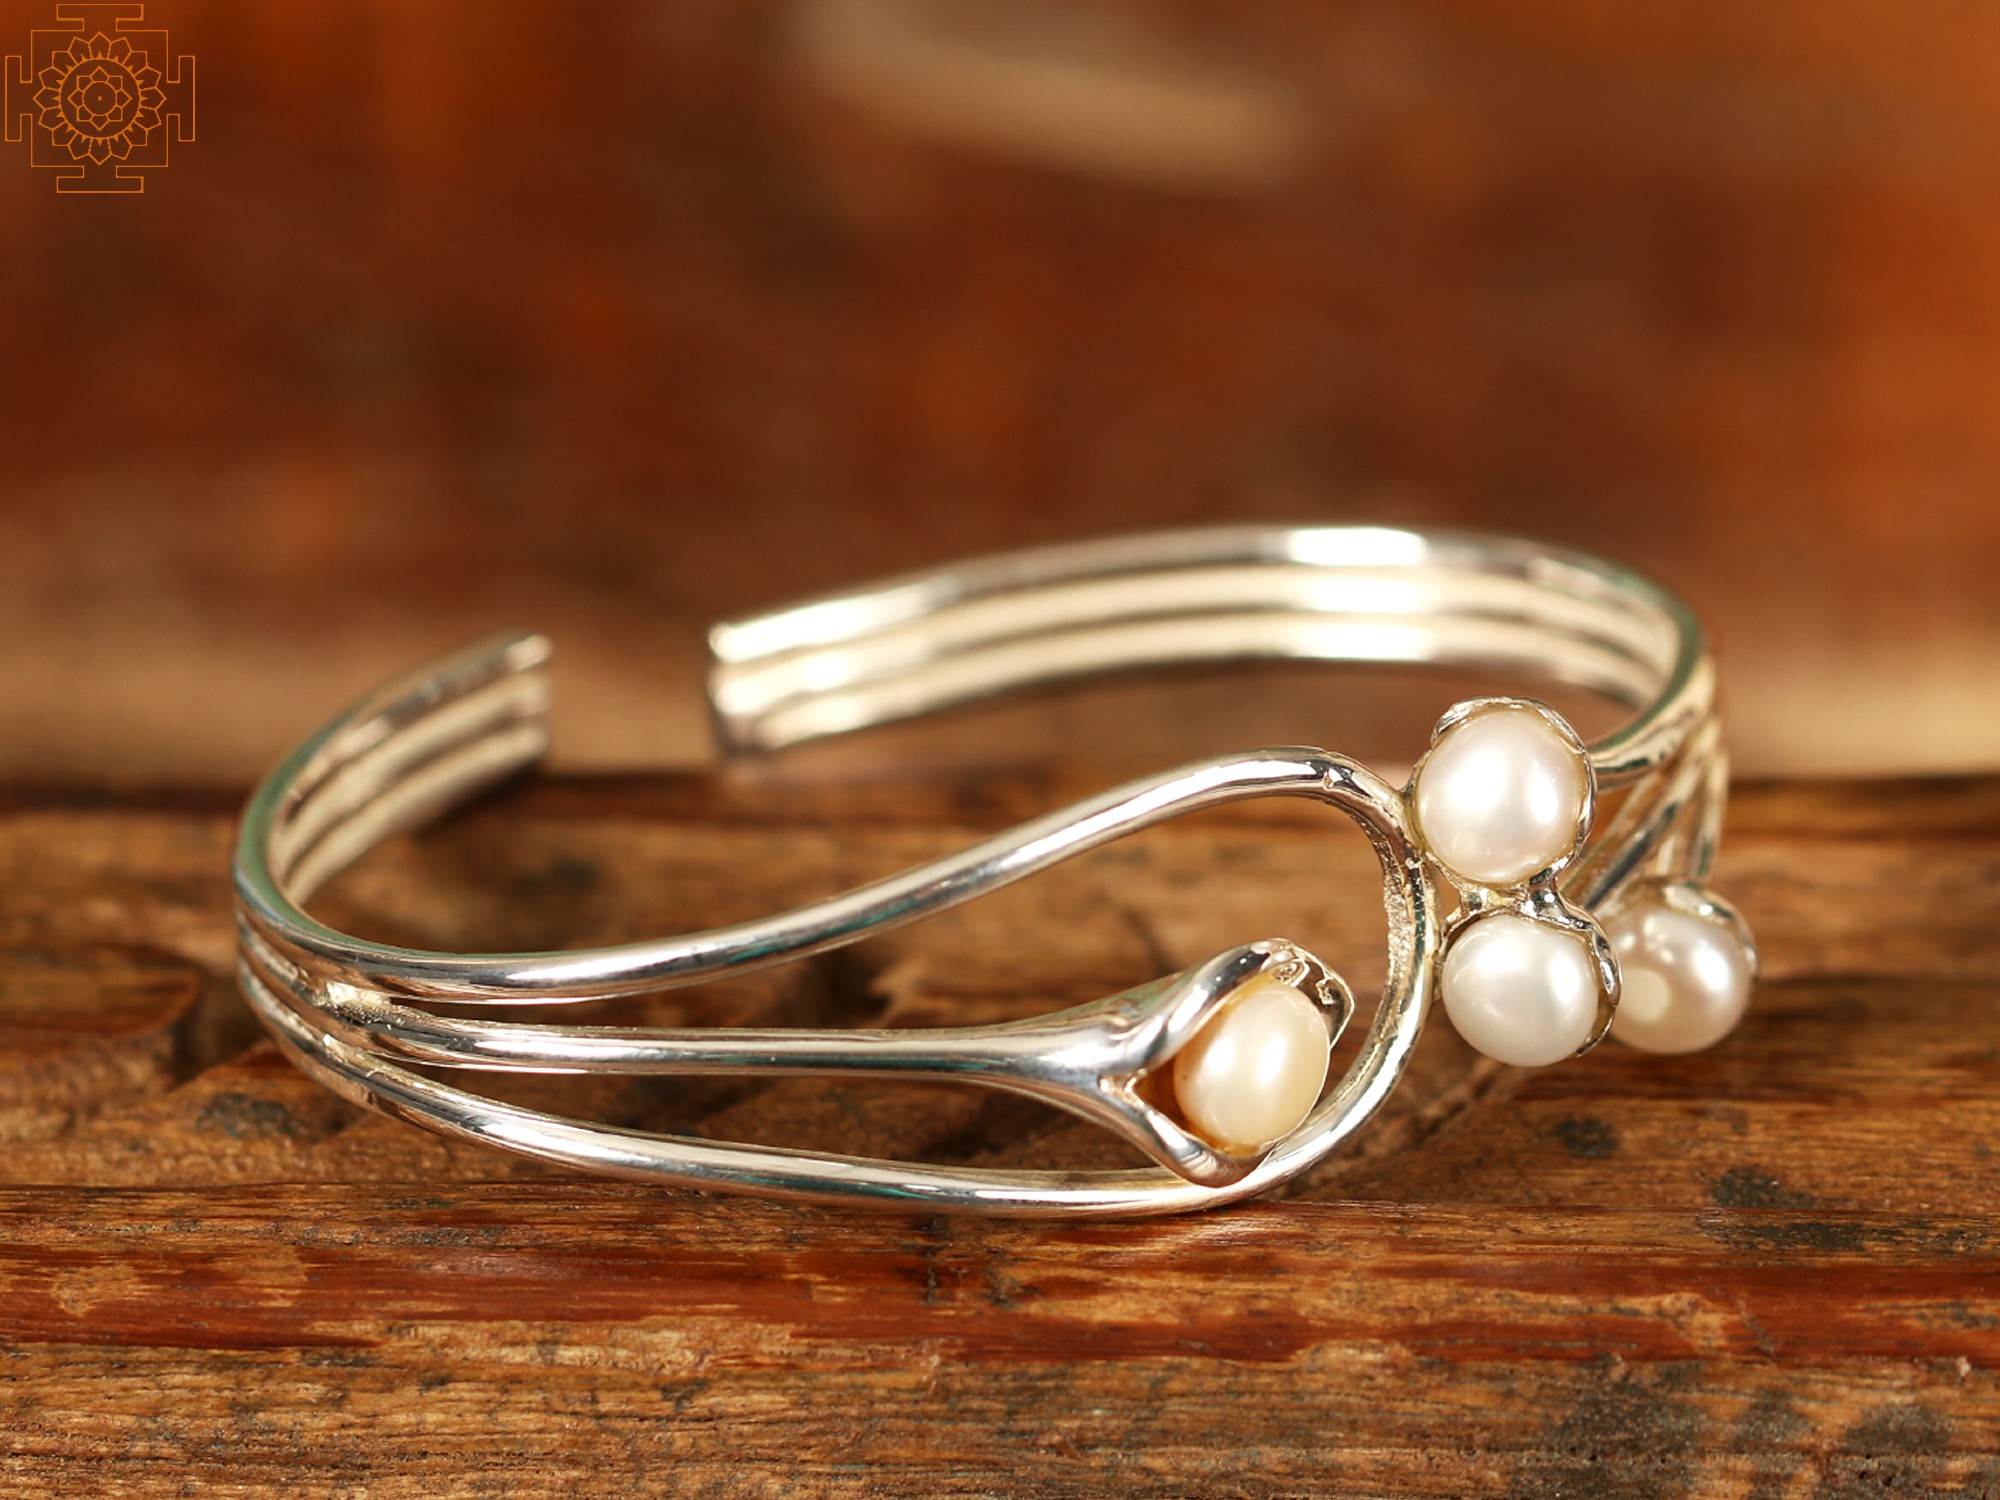 Silver Bracelets 001-640-00329 - Skewes Jewelry, Inc. | Skewes Jewelry,  Inc. | Marshall, MN